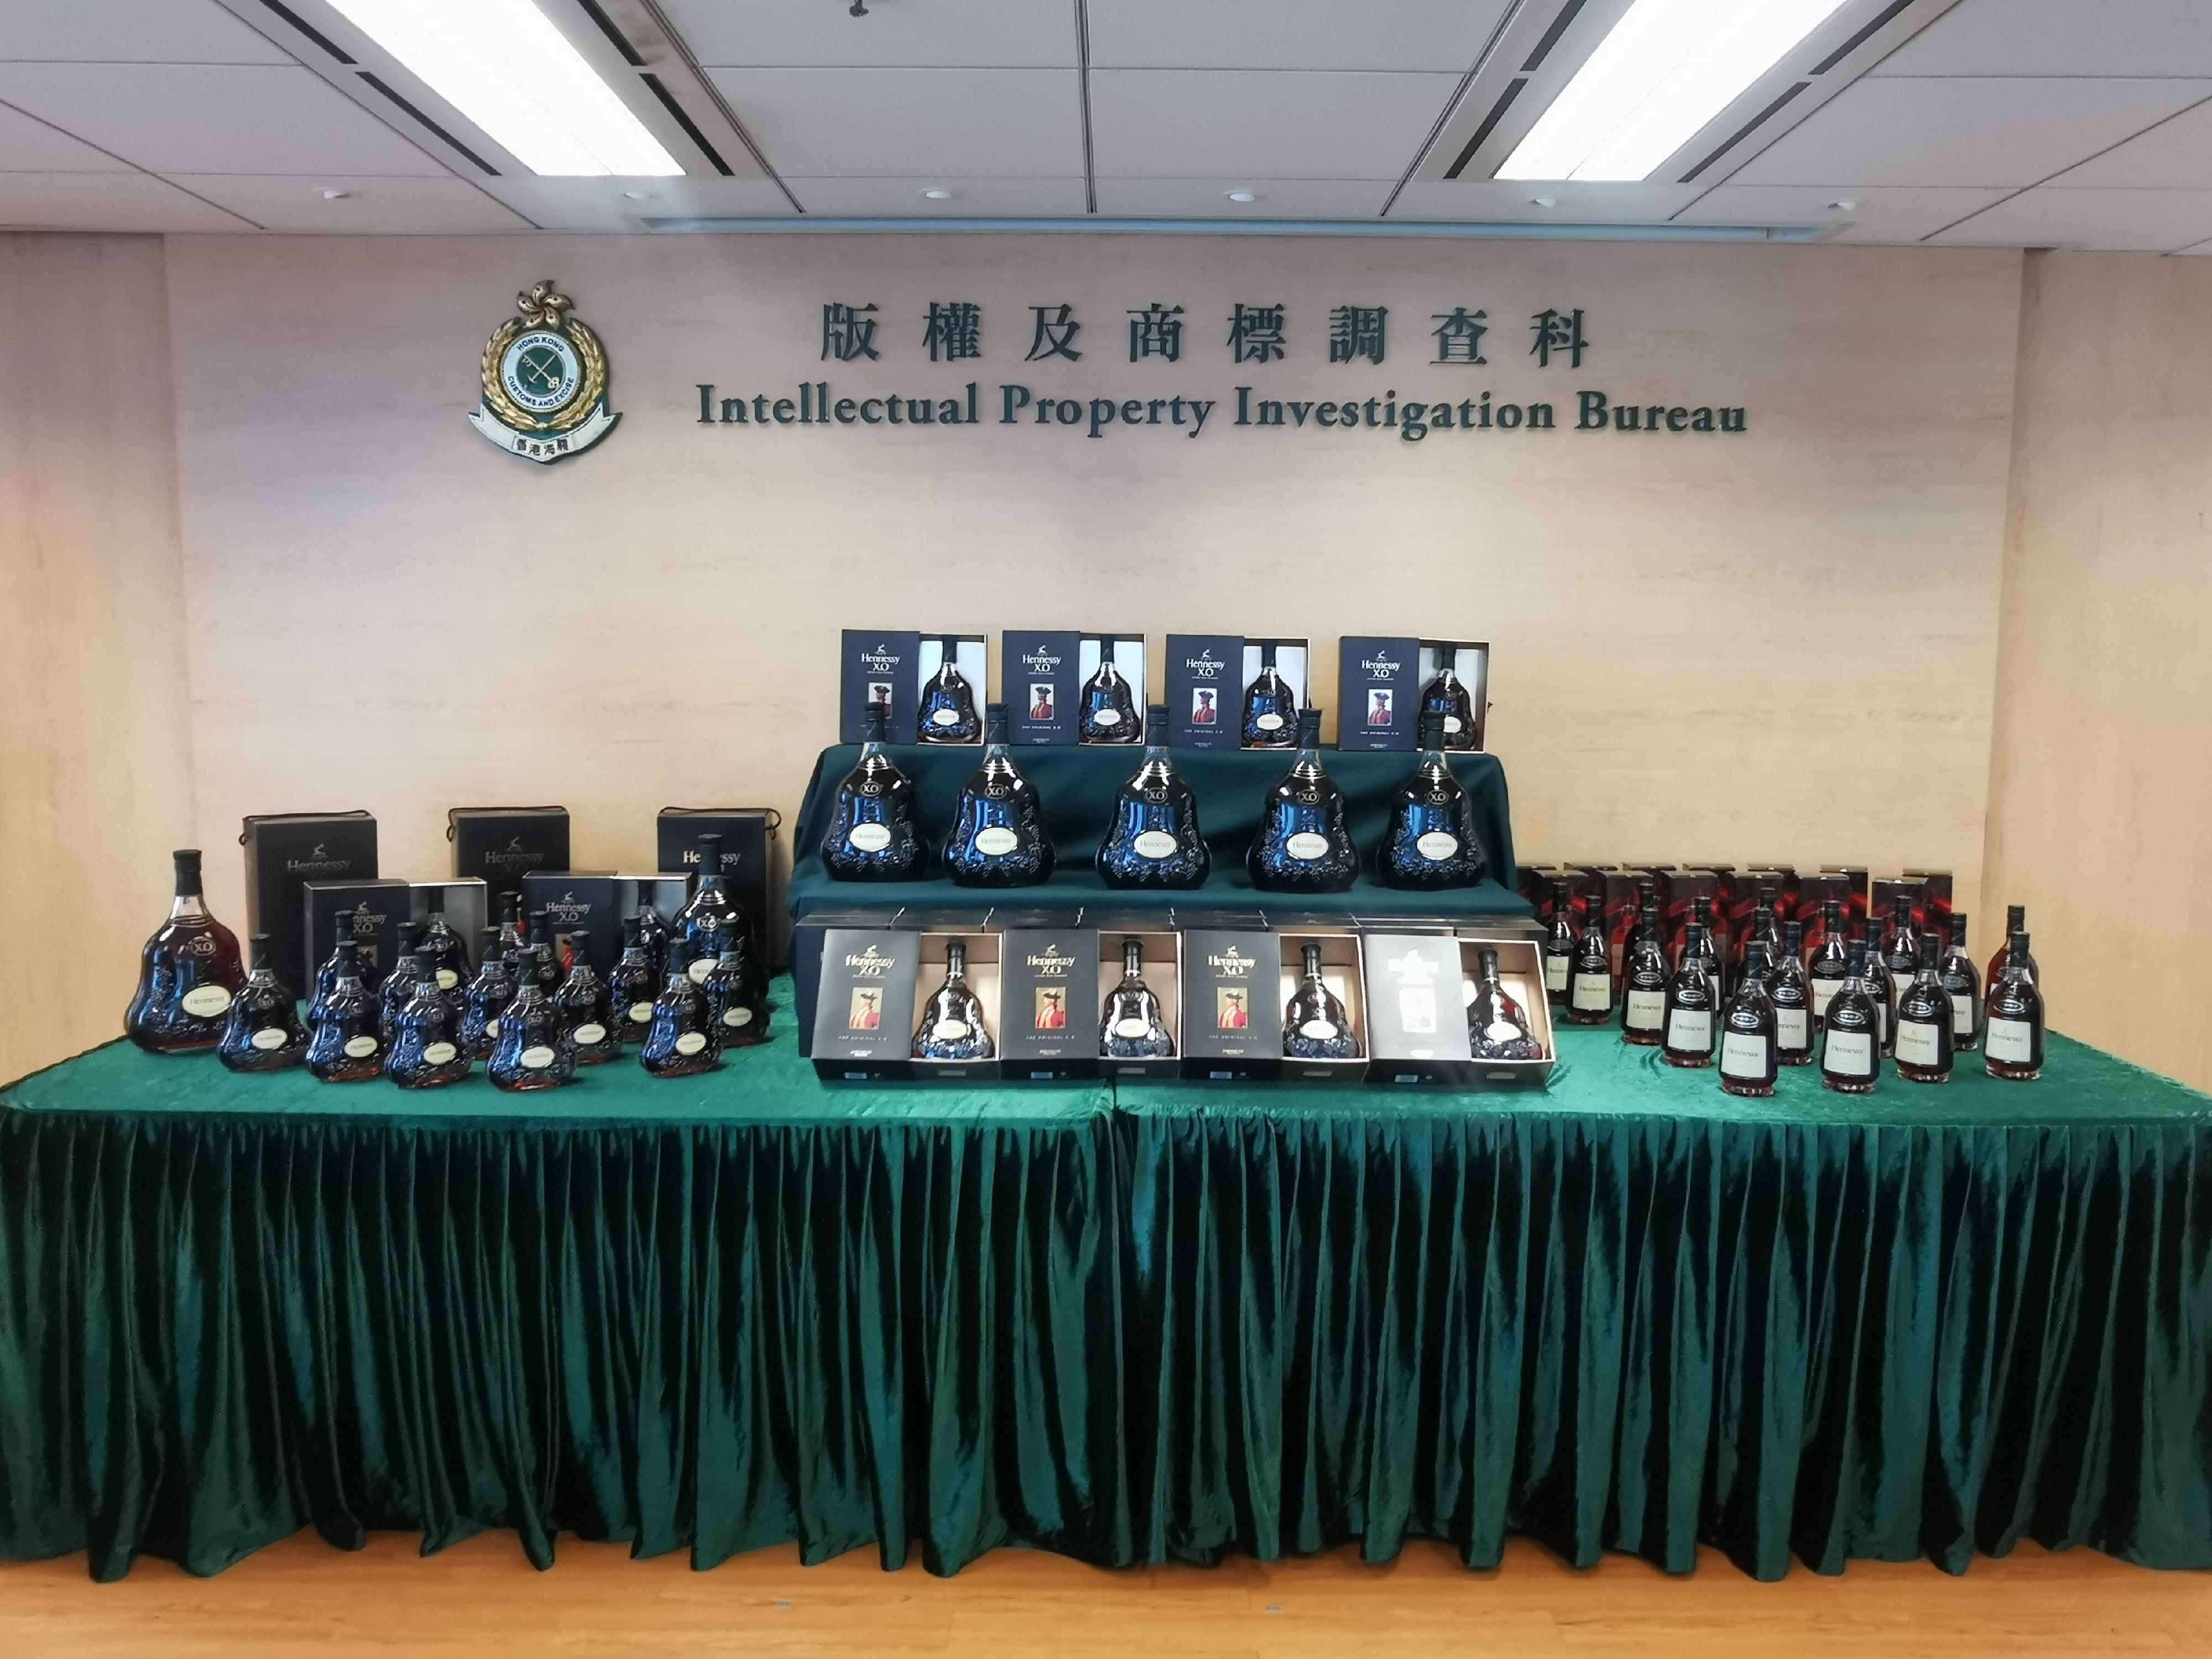 Hong Kong Customs yesterday (September 12) mounted a special enforcement operation in various districts to combat the sale of counterfeit liquor. A total of about 230 bottles of liquor, with a total volume of about 190 litres and an estimated market value of about $340,000, were seized. Photo shows some of the suspected counterfeit liquor seized.